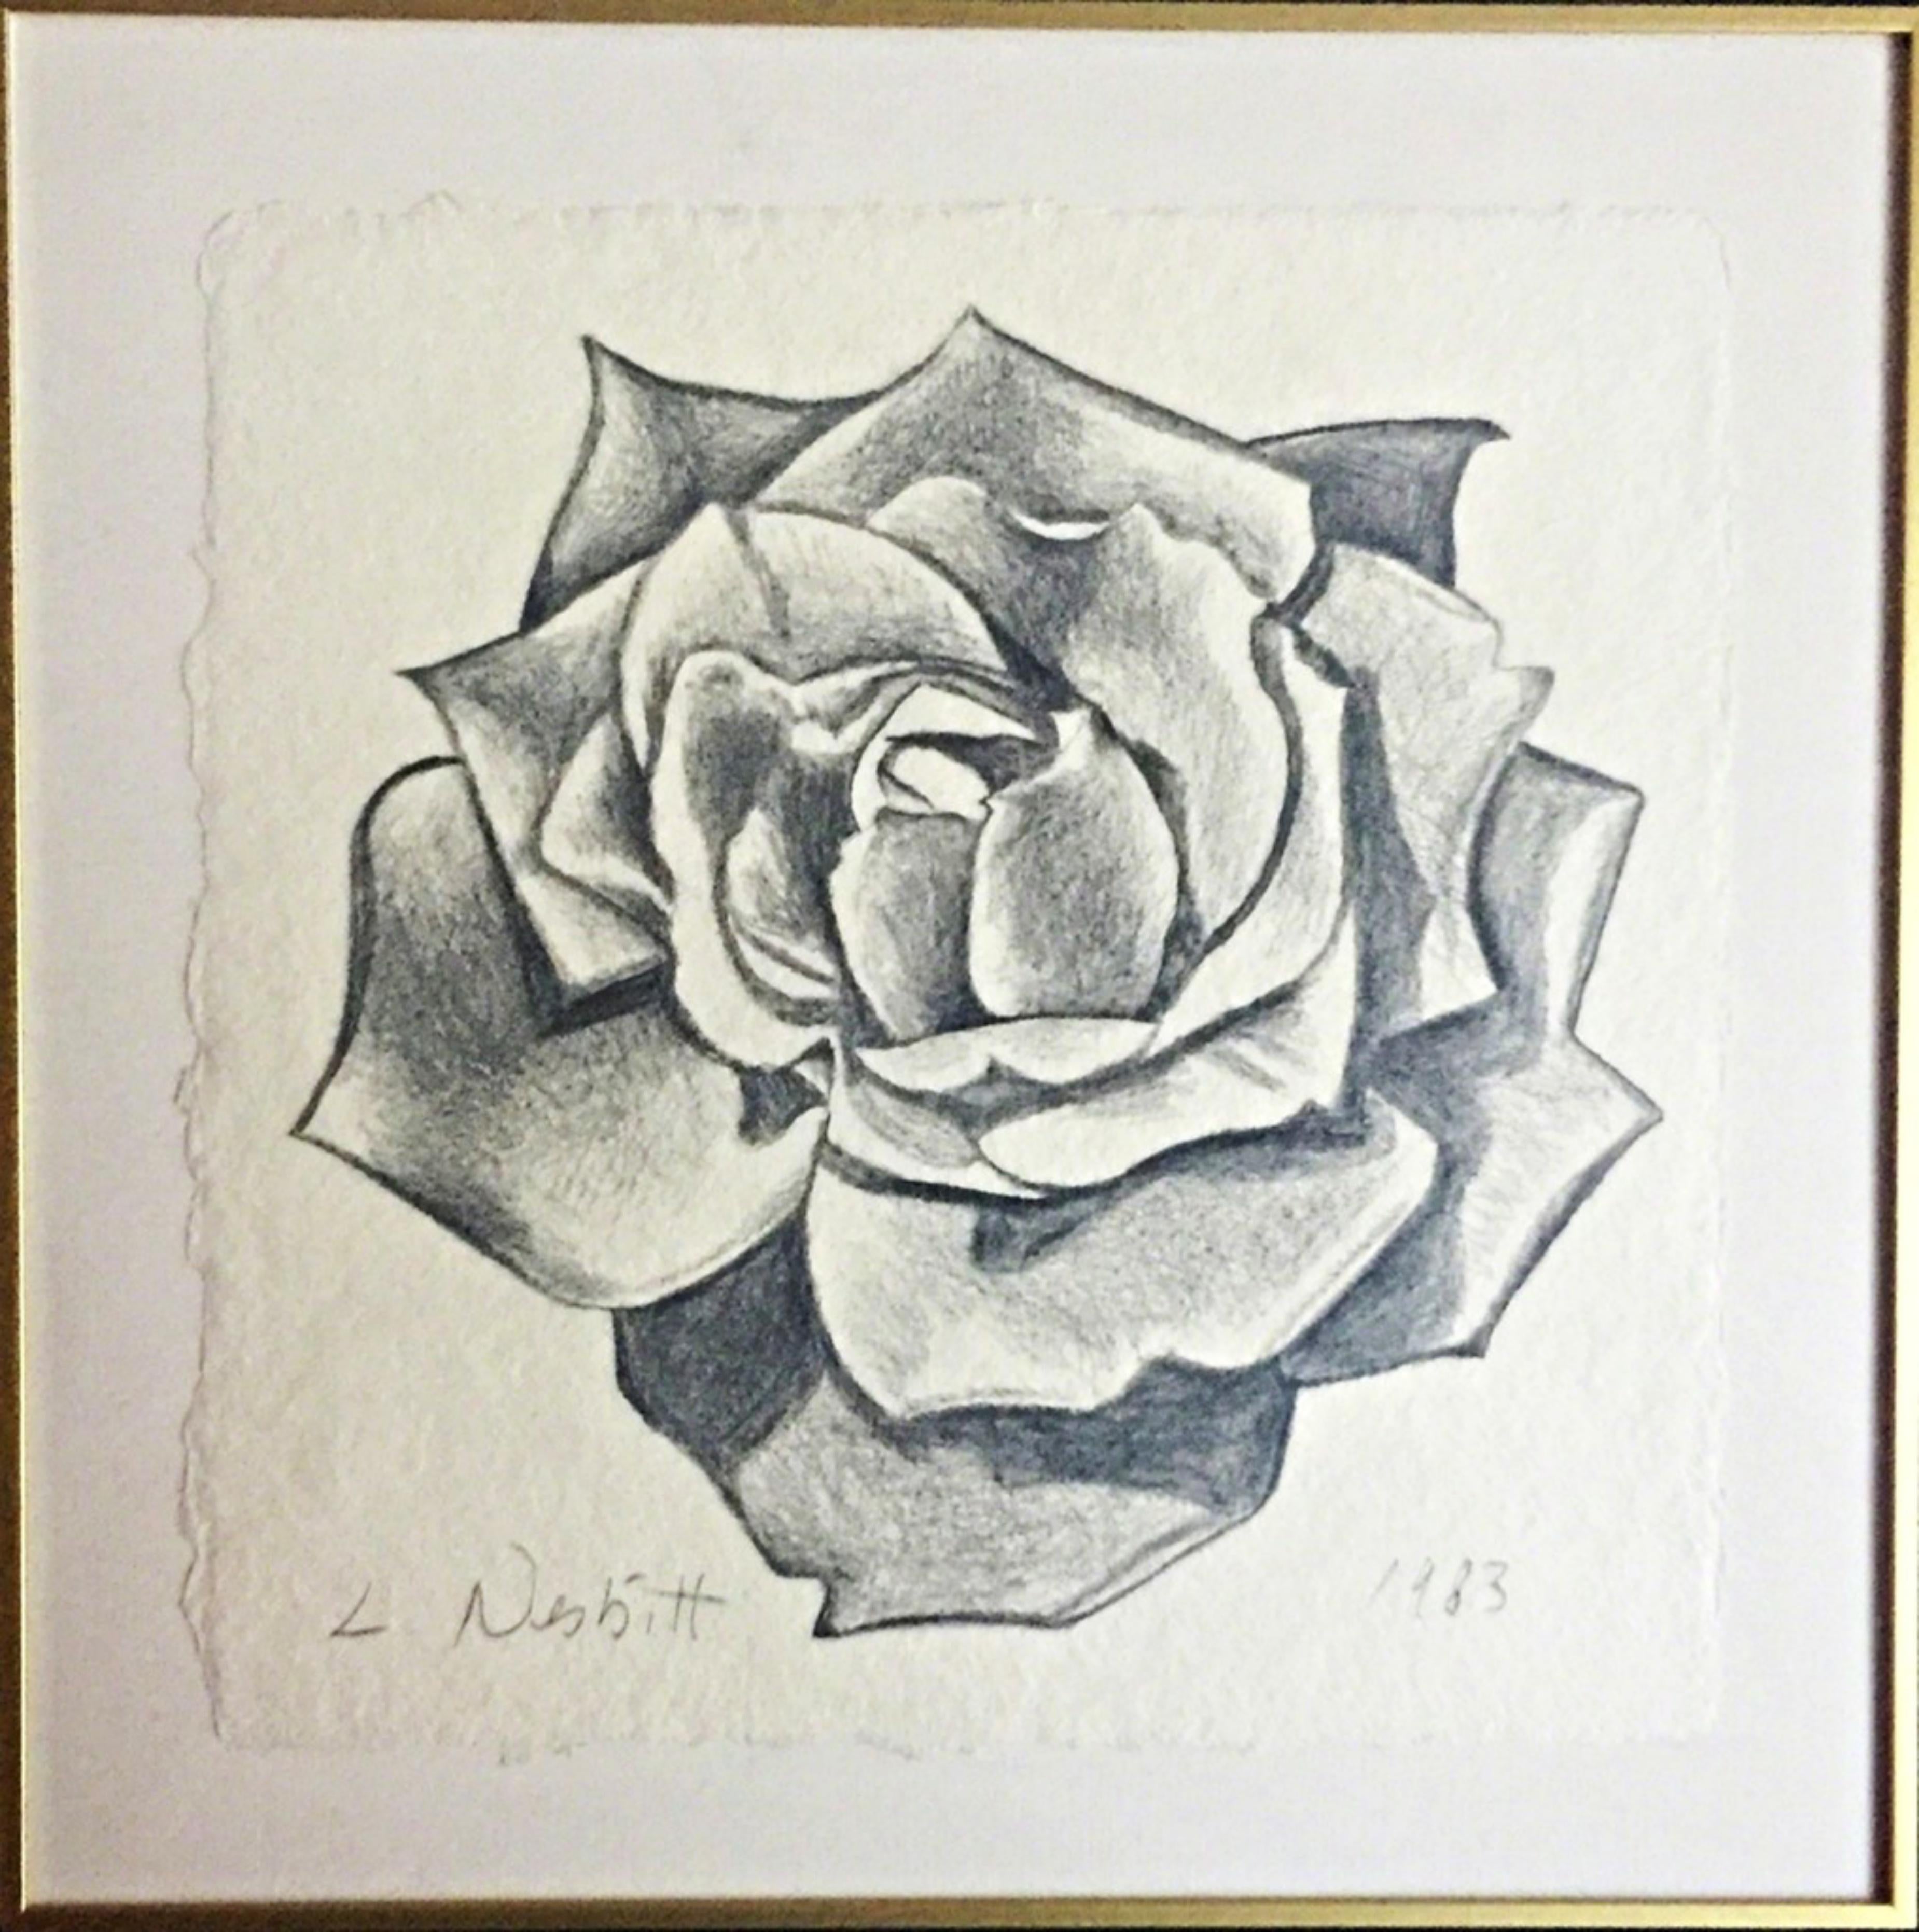 Exquisite  Rose Drawing (unique) done in graphite, hand signed with provenance - Art by Lowell Nesbitt